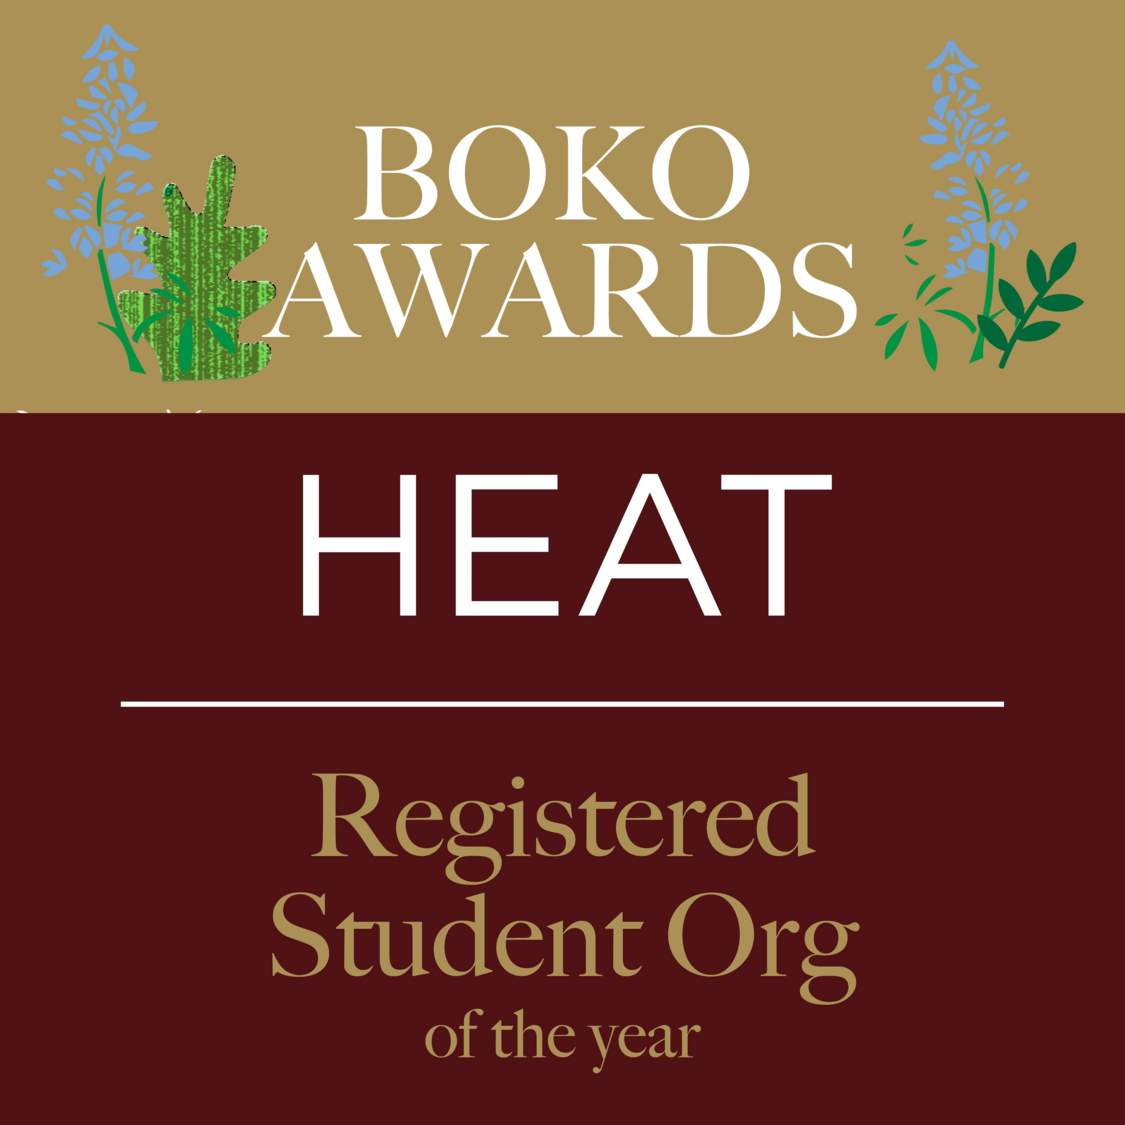 Picture of text displaying that HEAT won the Registered Student Organization of the Year award.